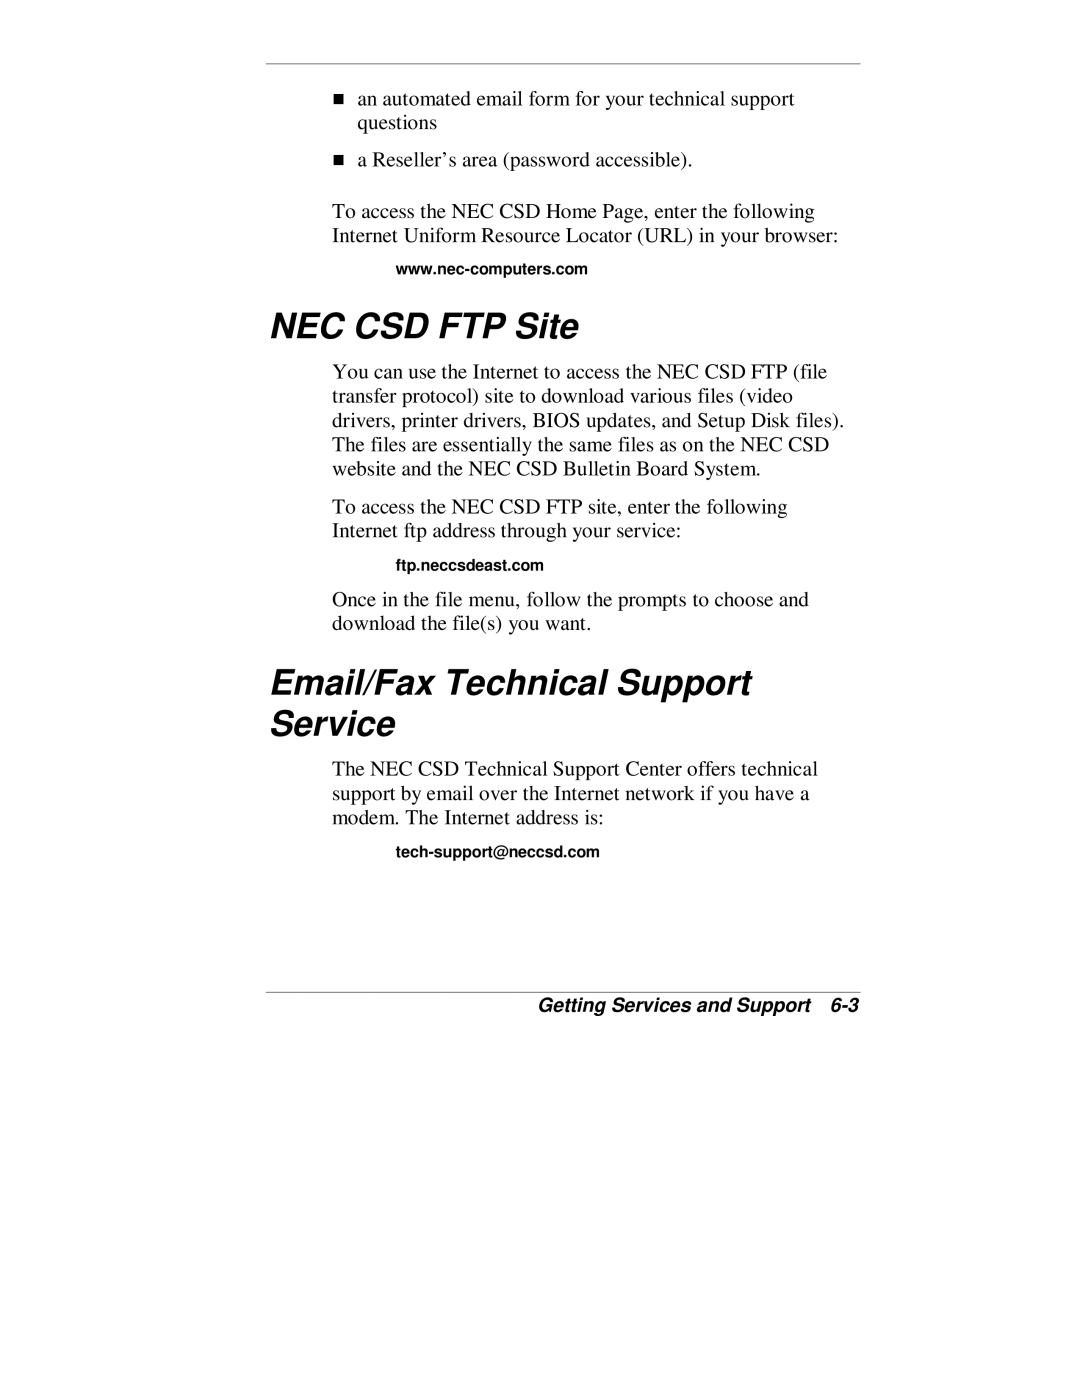 NEC VT 300 Series manual NEC CSD FTP Site, Email/Fax Technical Support Service 